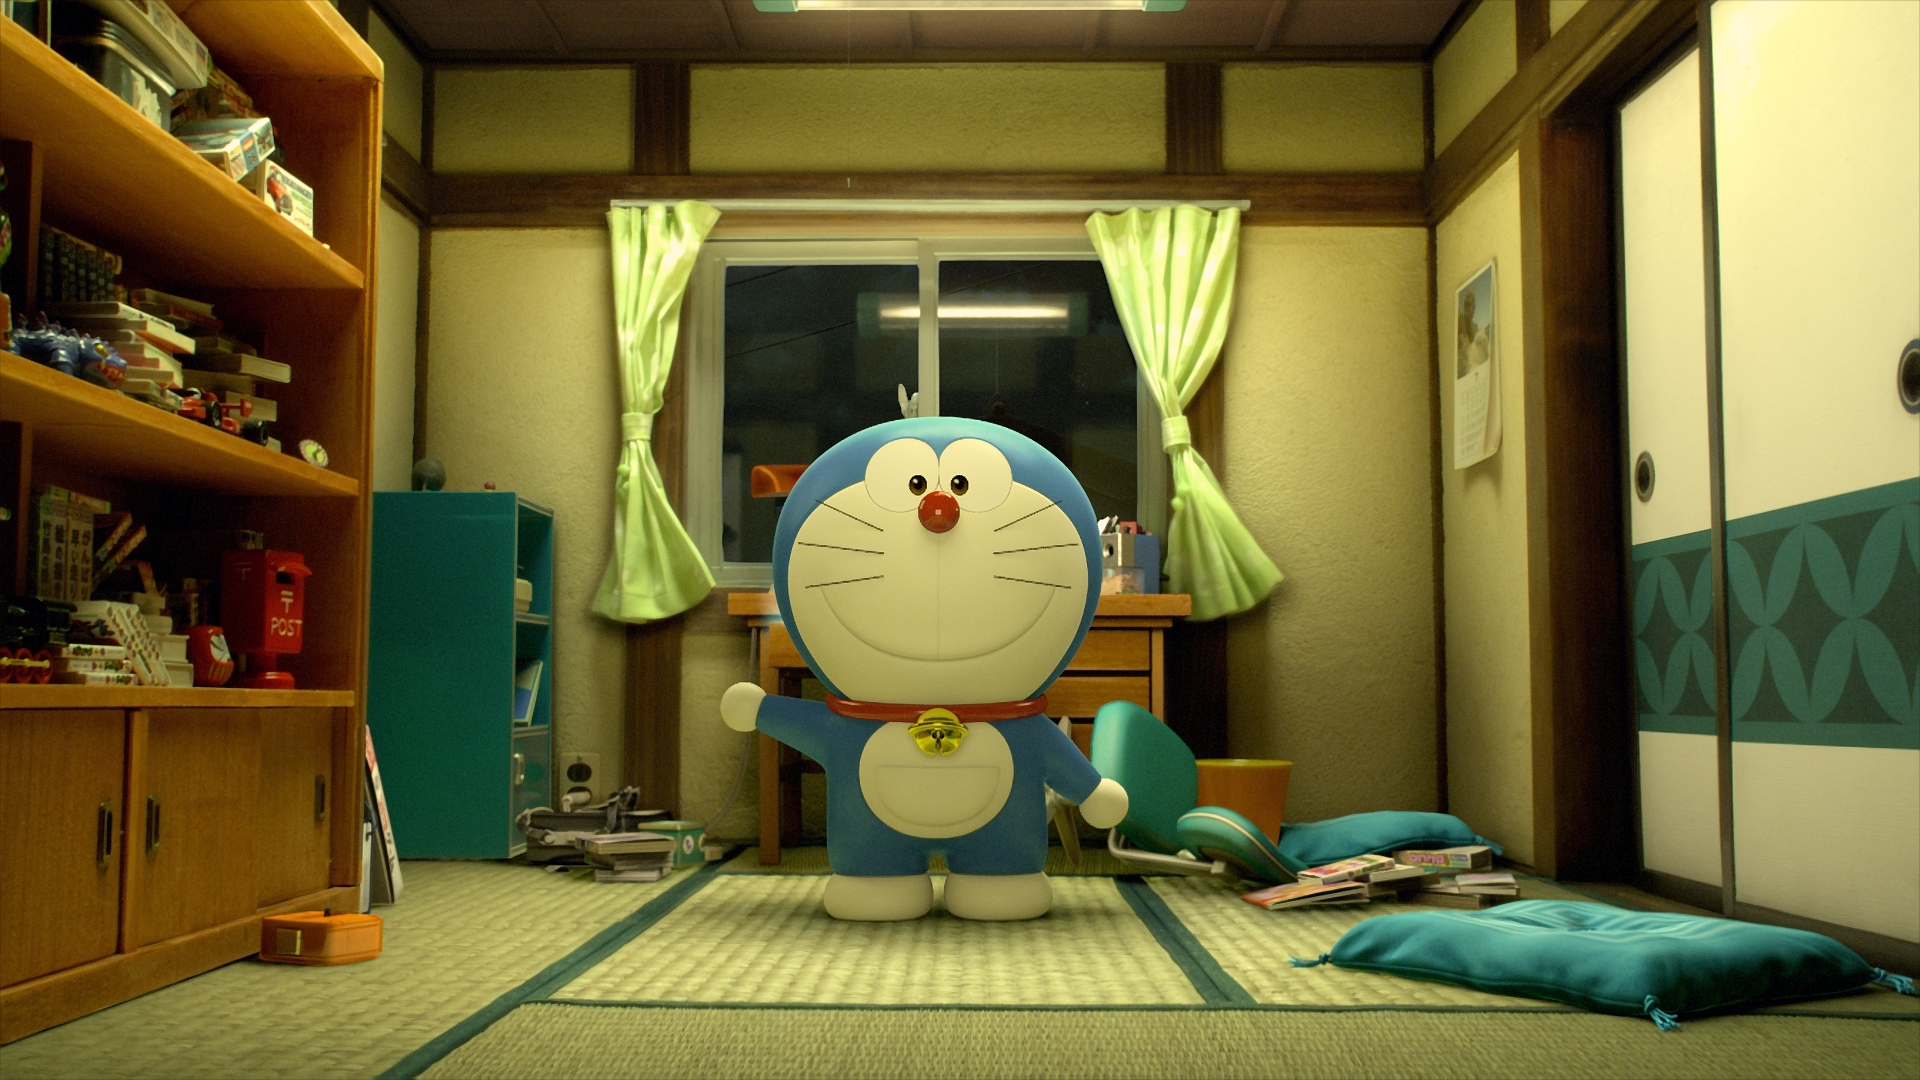 STAND BY ME　Doraemon 3D　Meet you in CNY